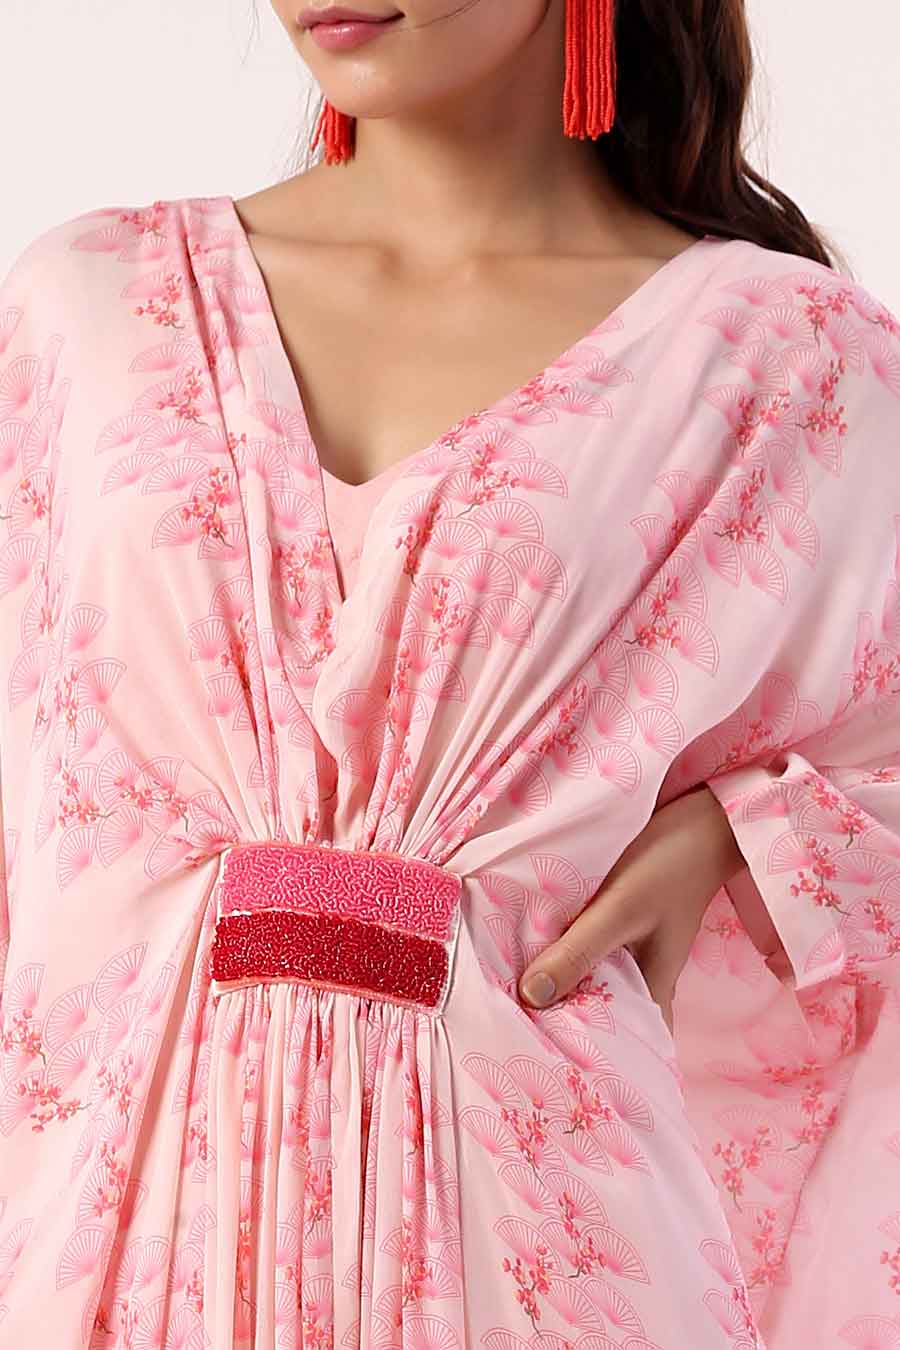 Pink Embroidered Kaftan Dress With Slip